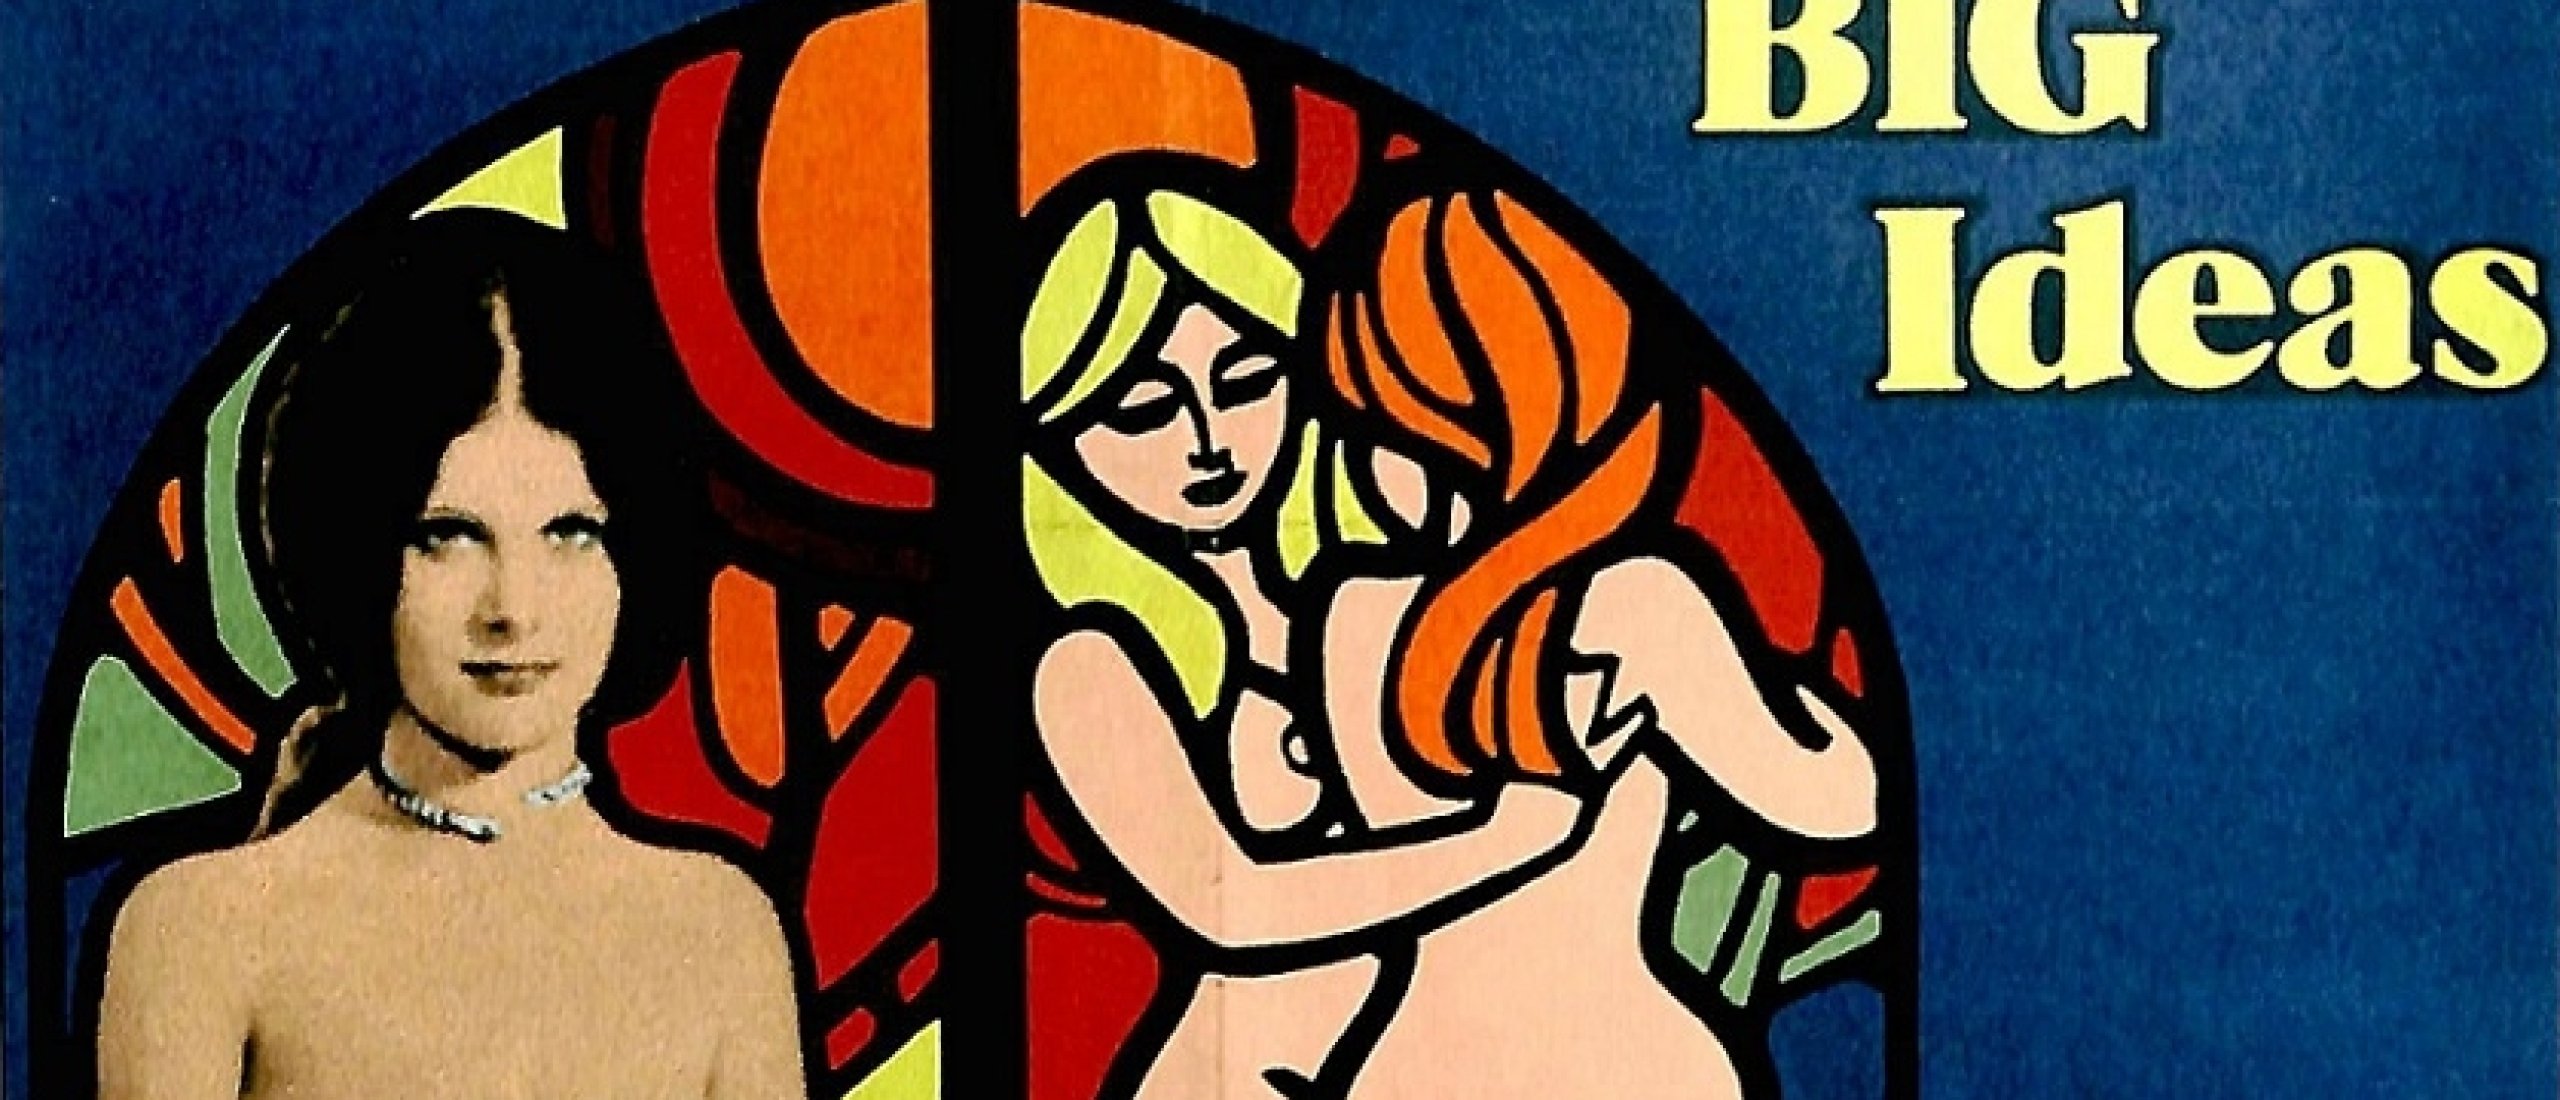 60s Porn Posters - Porn Posters From the 60s And 70s